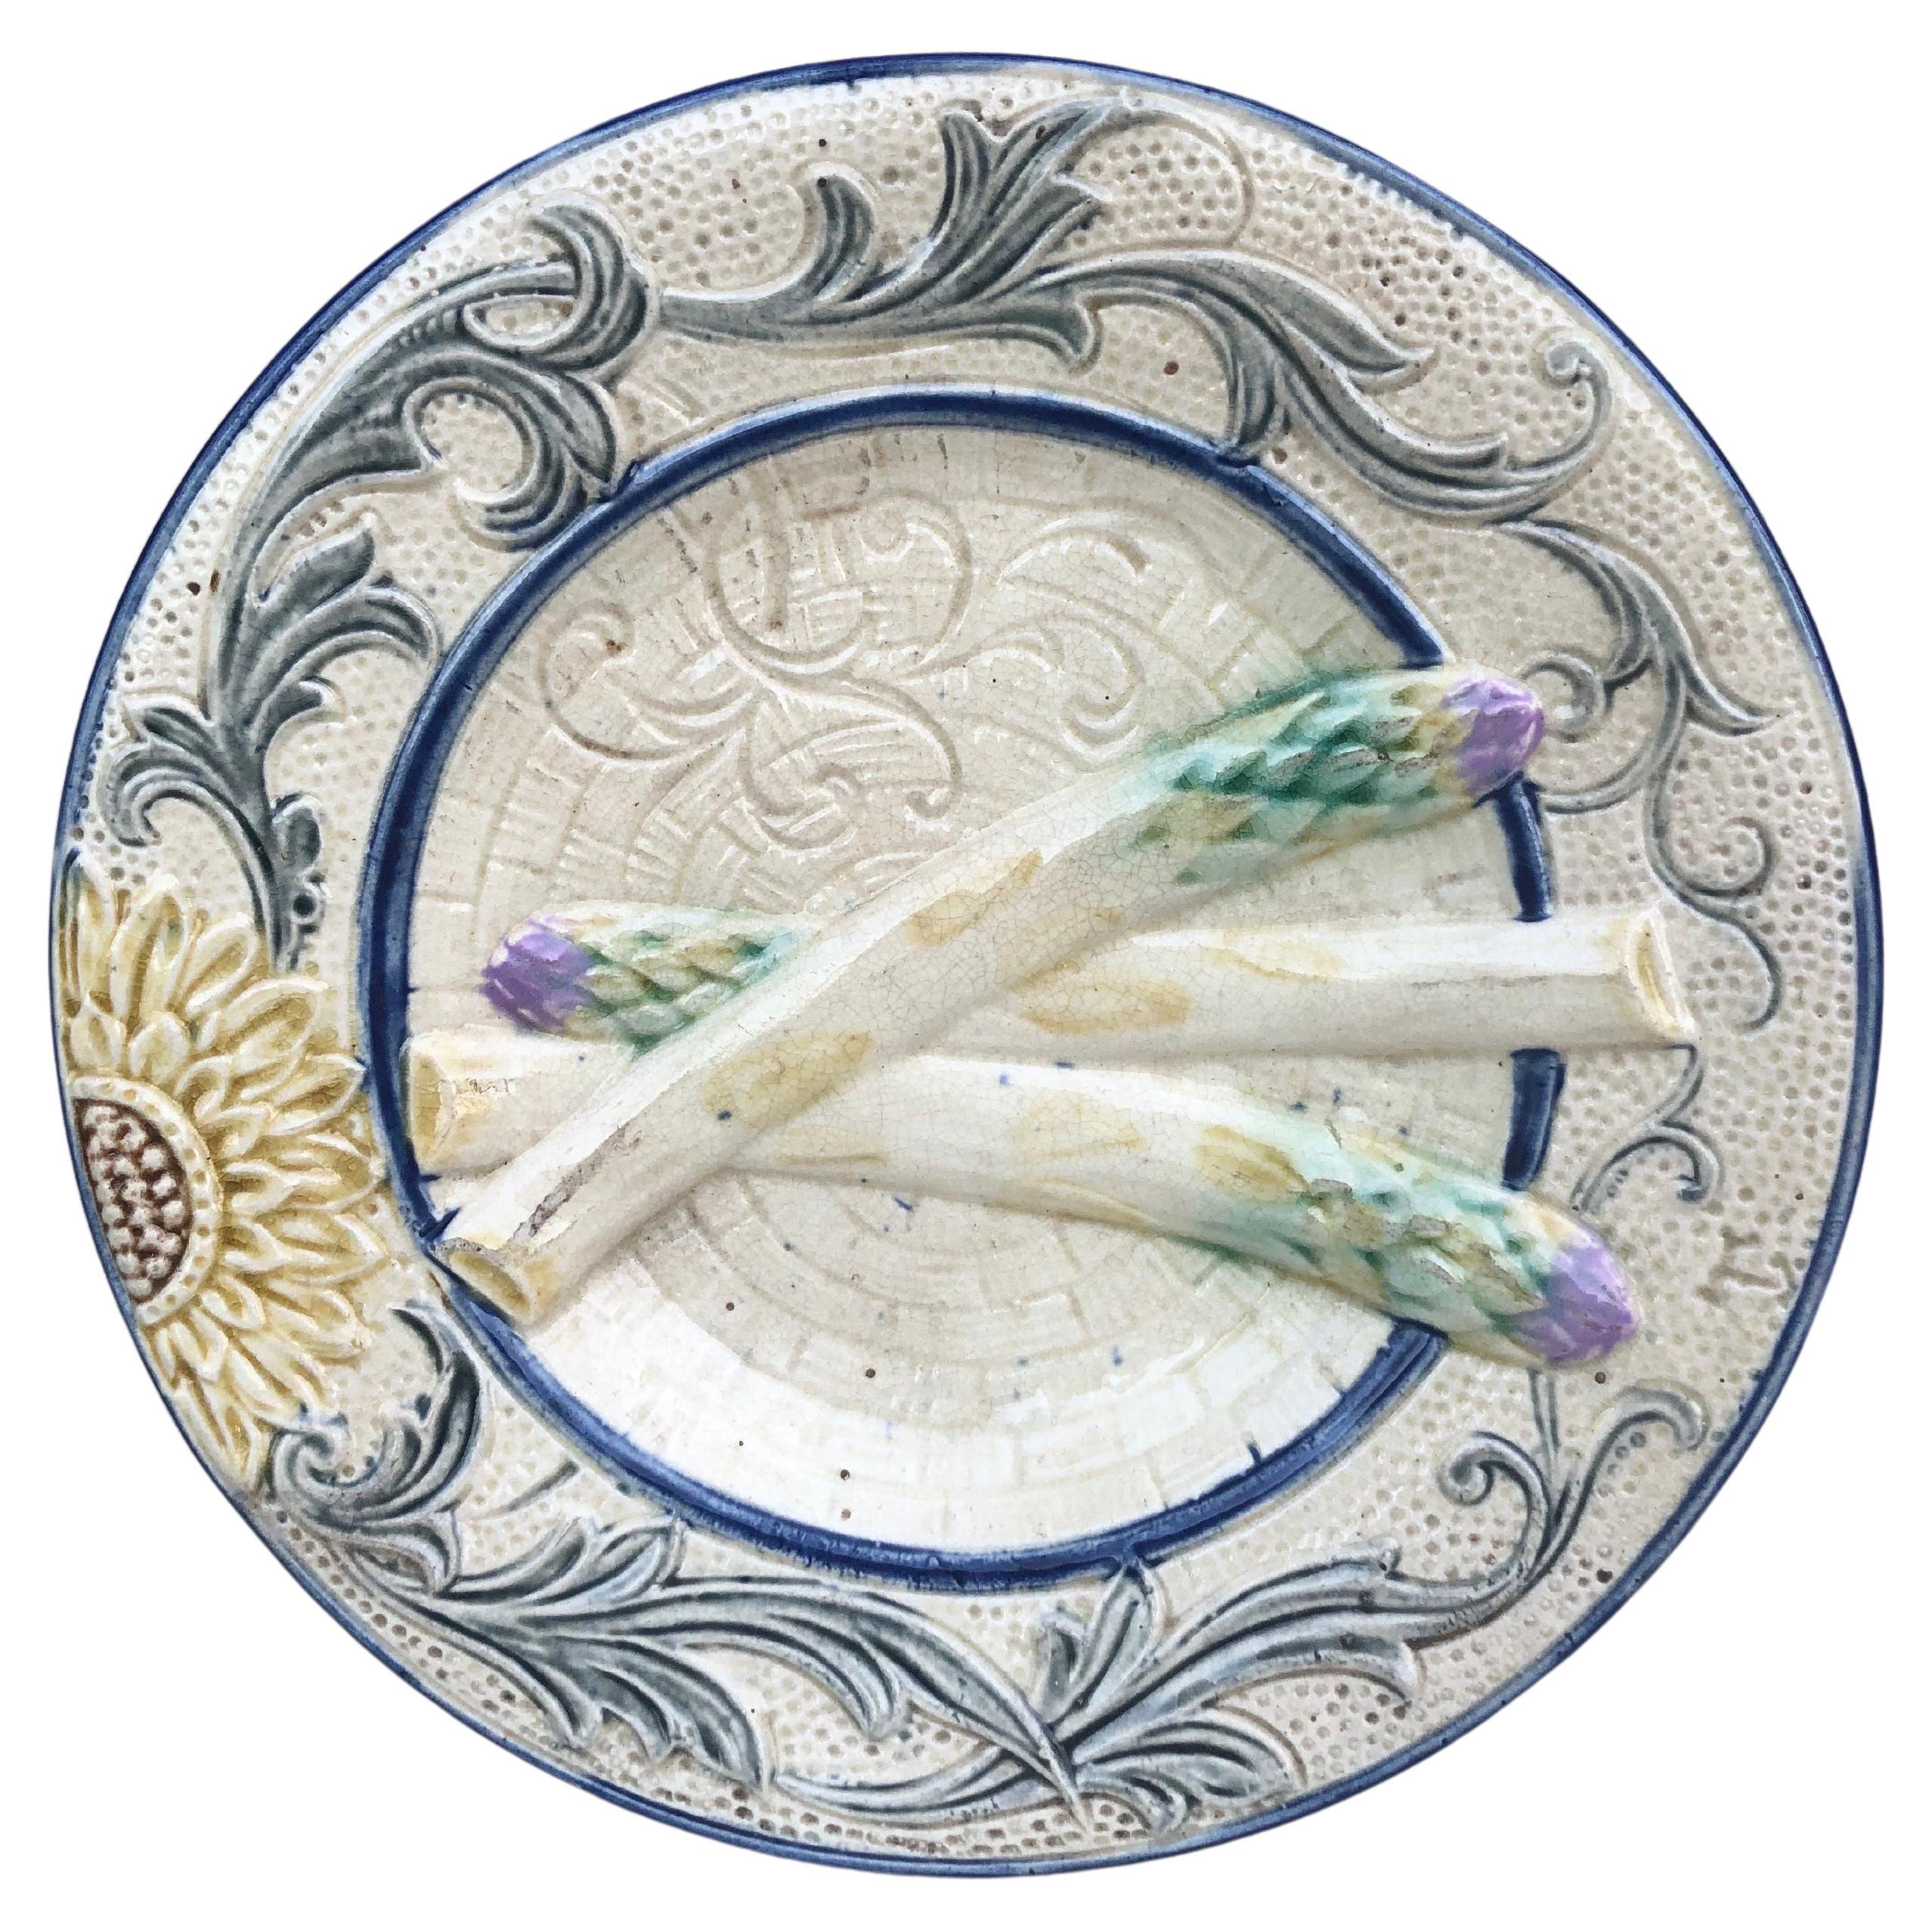 What is antique majolica?